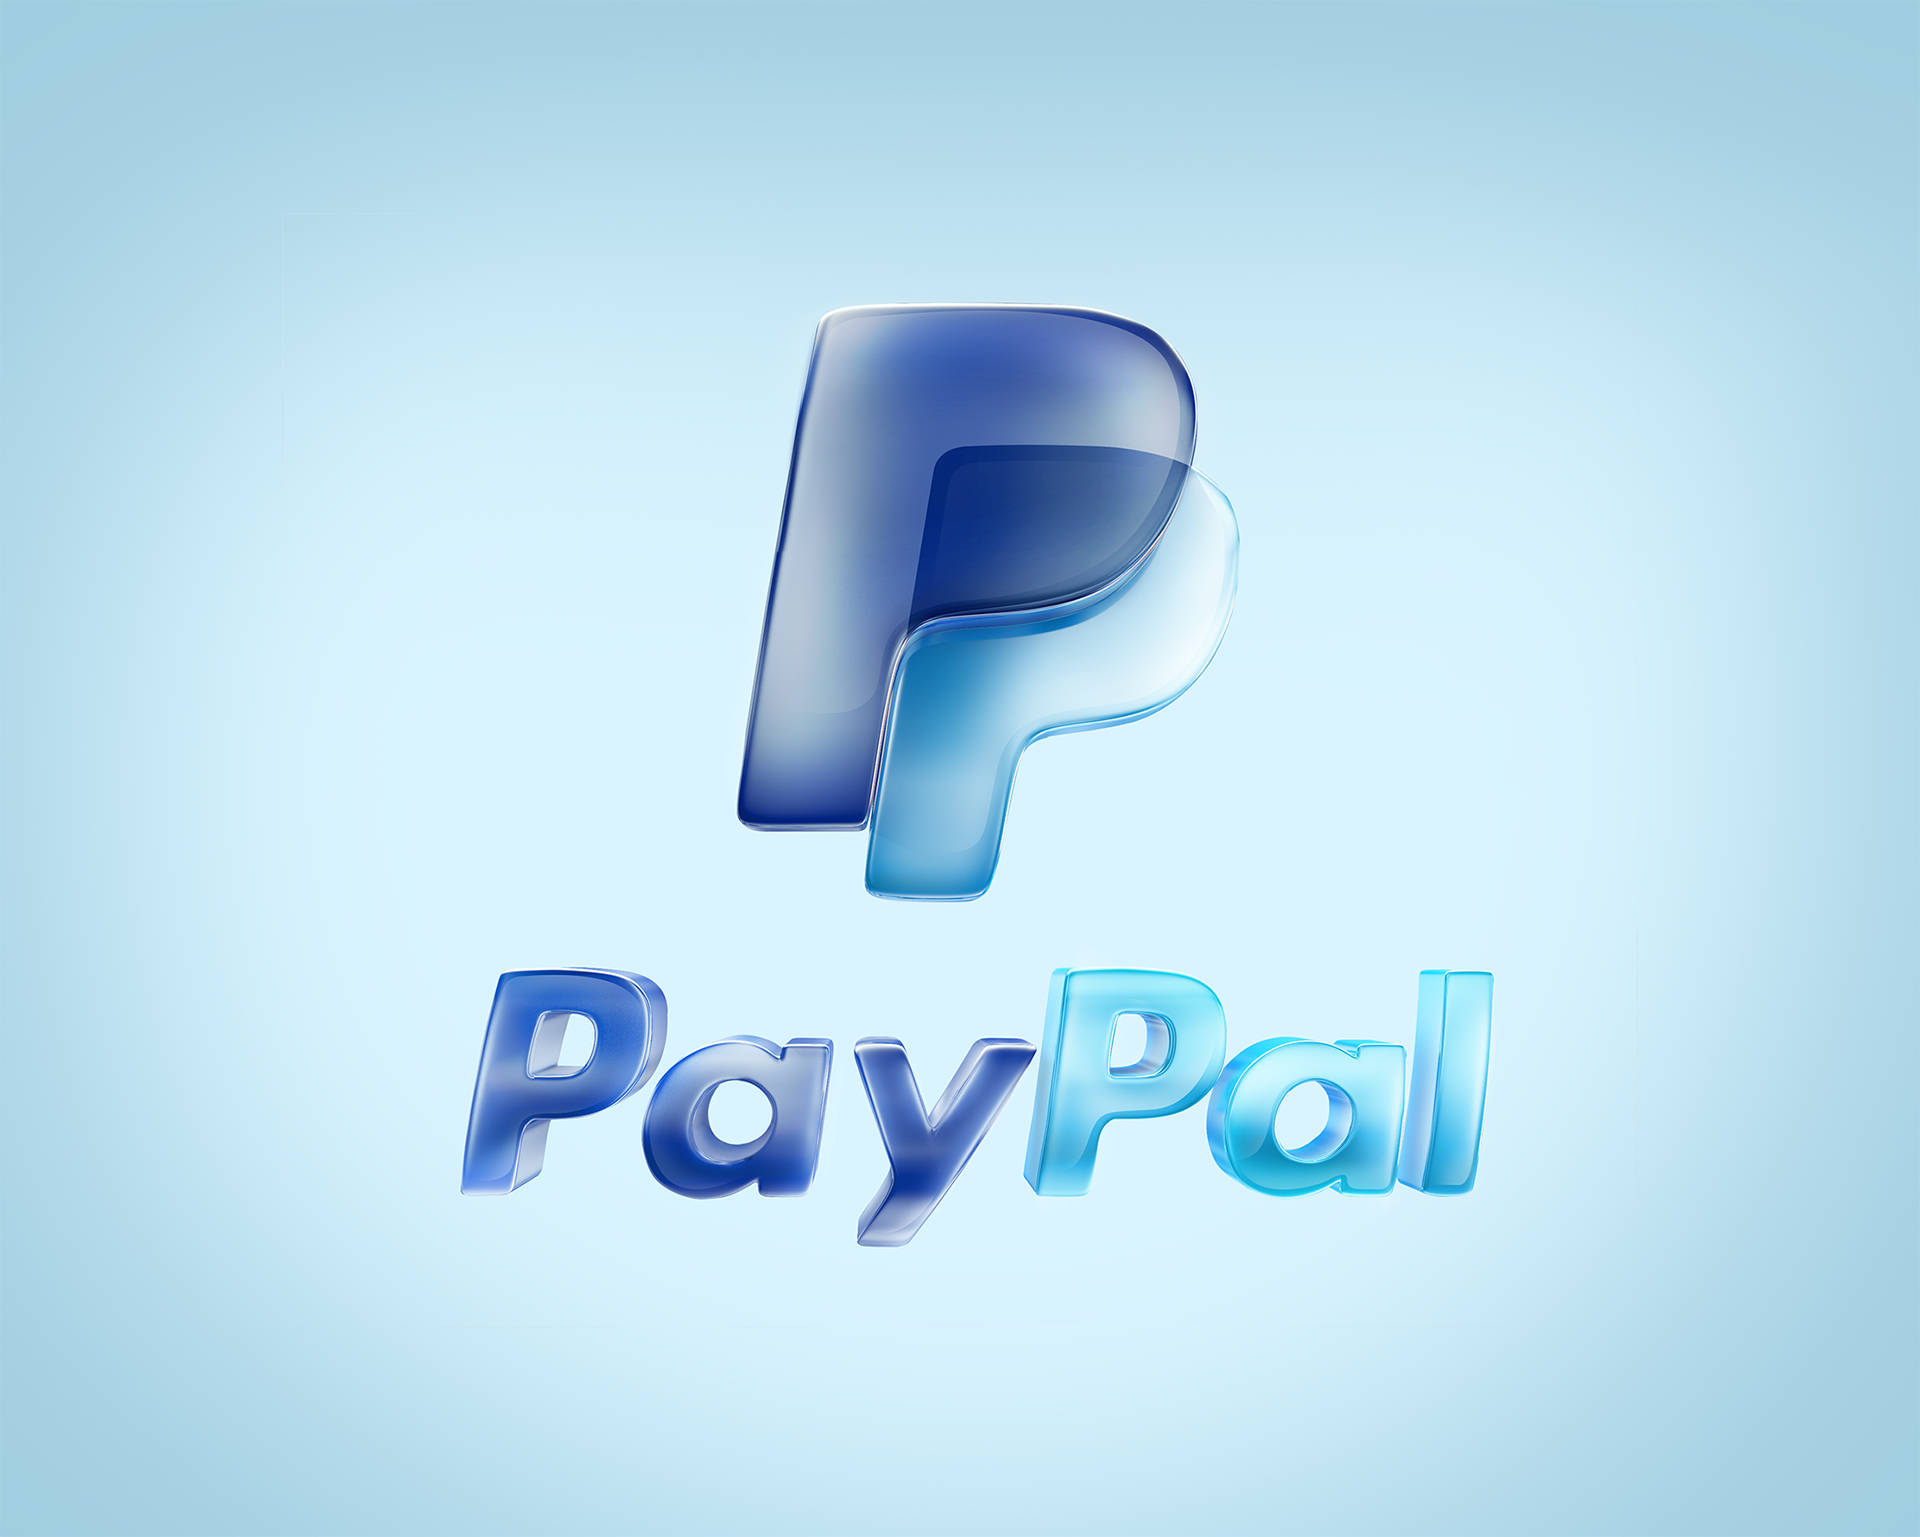 Paypal Pictures